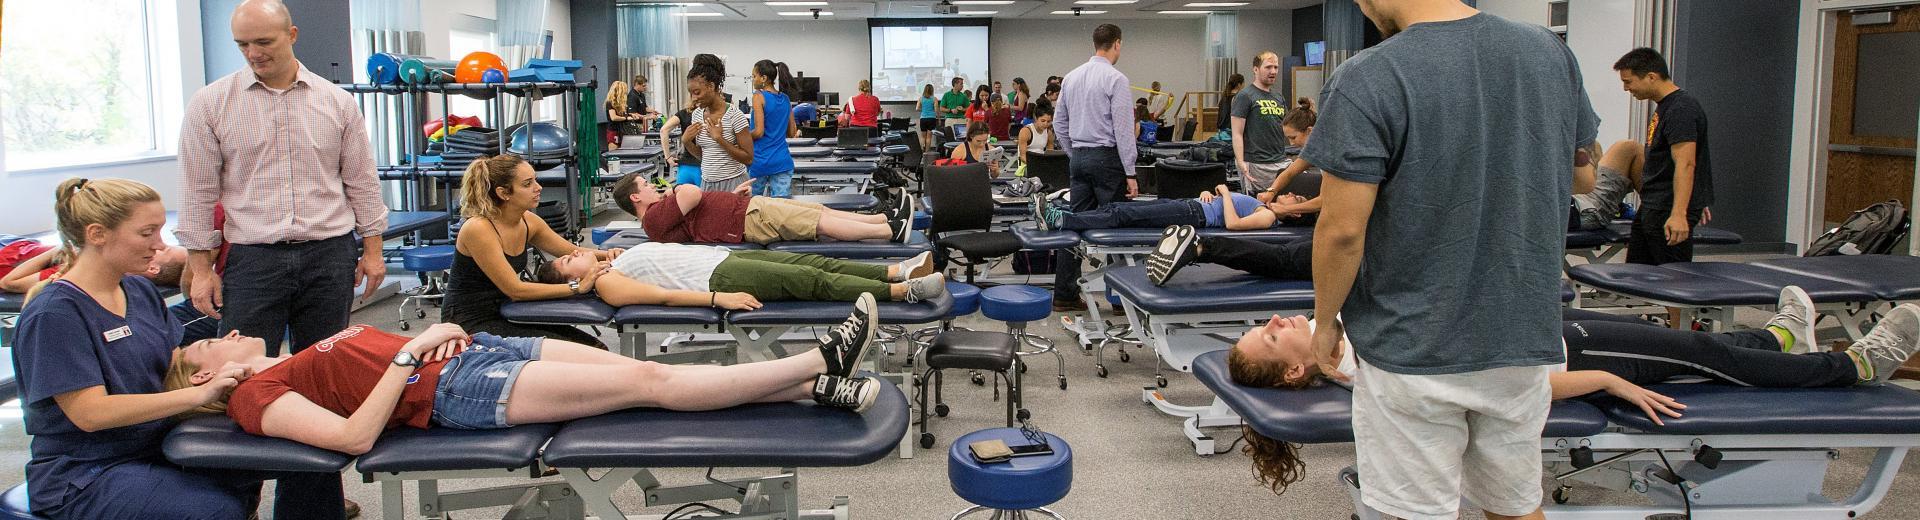 Physical therapy students practicing on patients